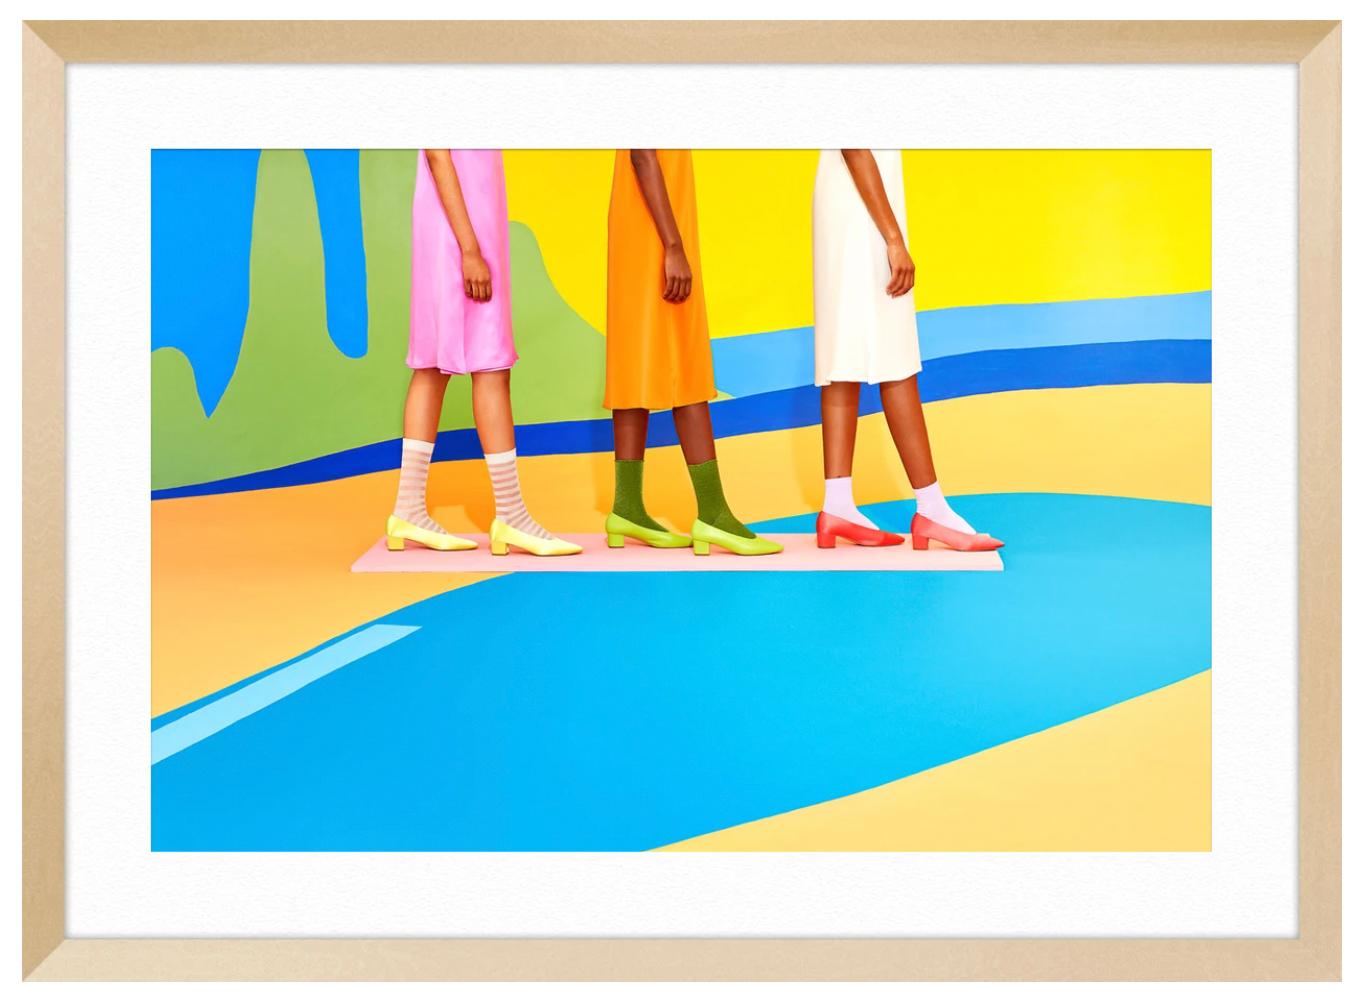 ABOUT THIS ARTIST: Tropico Photo is the collaborative work of Forrest Aguar and Michelle Norris. Forrest loves pairing shapes and lines to create captivating compositions and Michelle loves seeking out compelling color combinations. Together, they